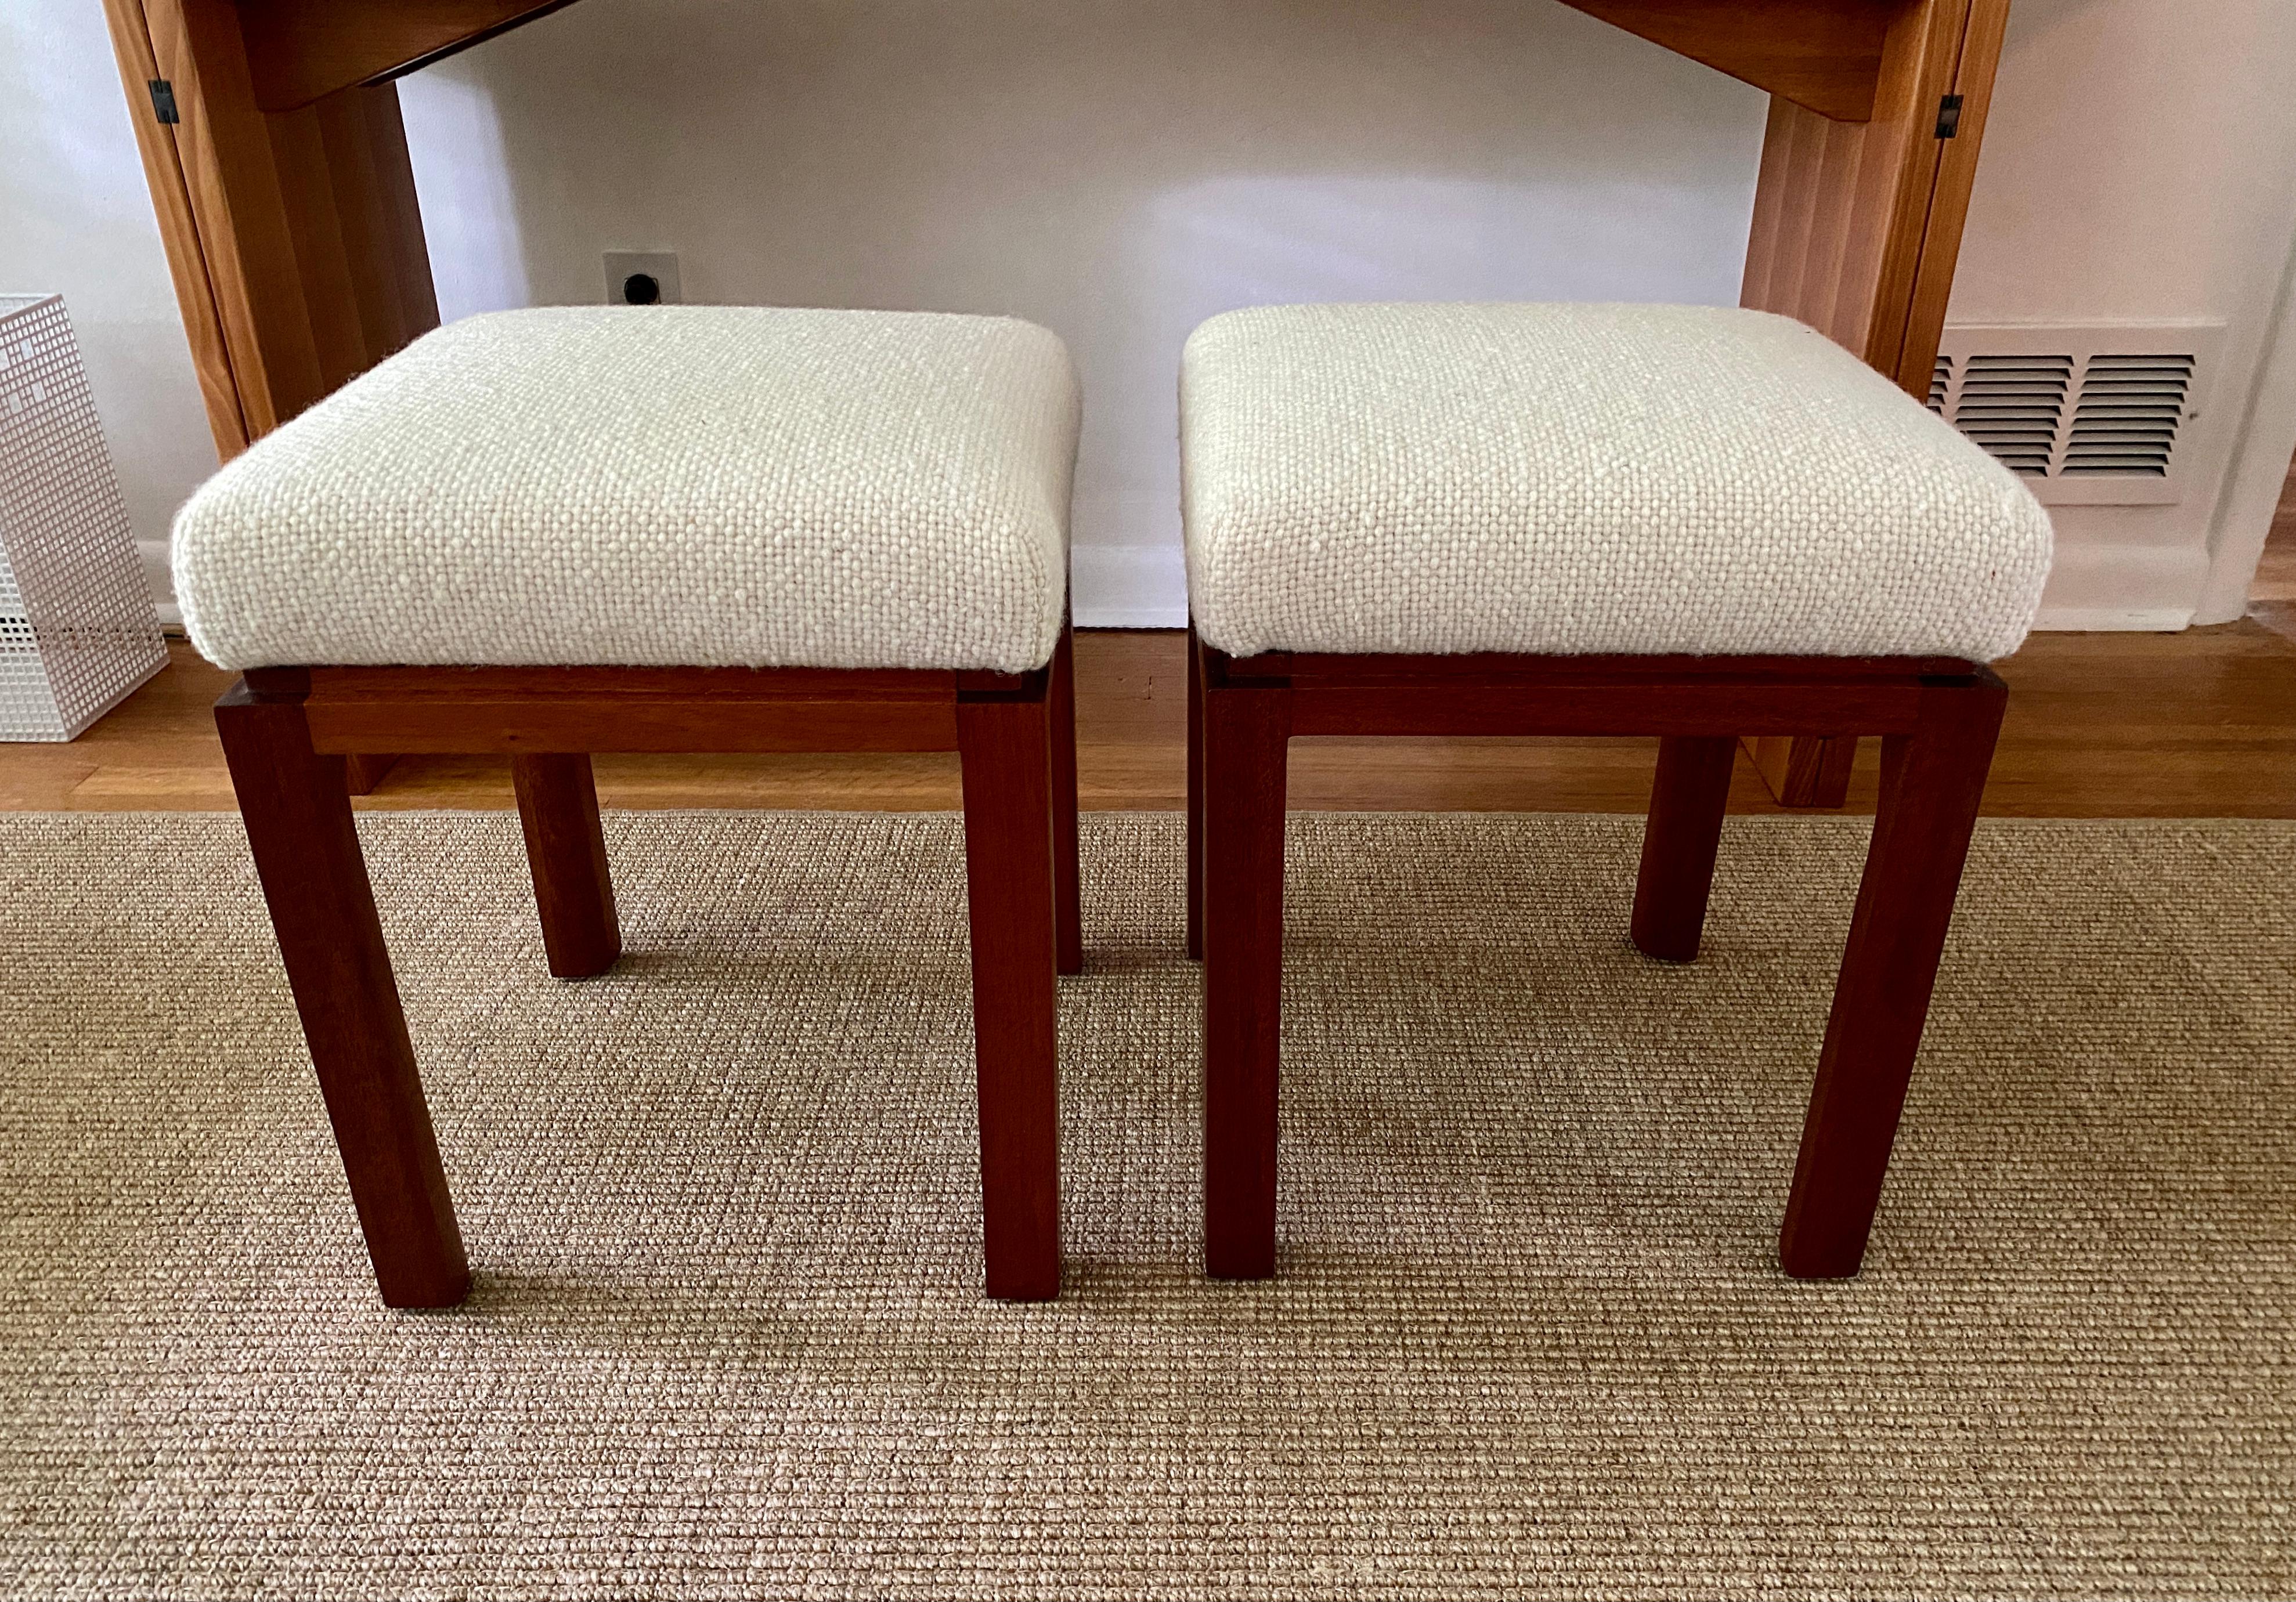 A pair of vintage benches designed by Harvey Probber for his own manufacturing company in 1955, the benches are in his catalog and are model number 929. The benches have been recently reupholstered in a cream 100% wool fabric called “Morocco” by